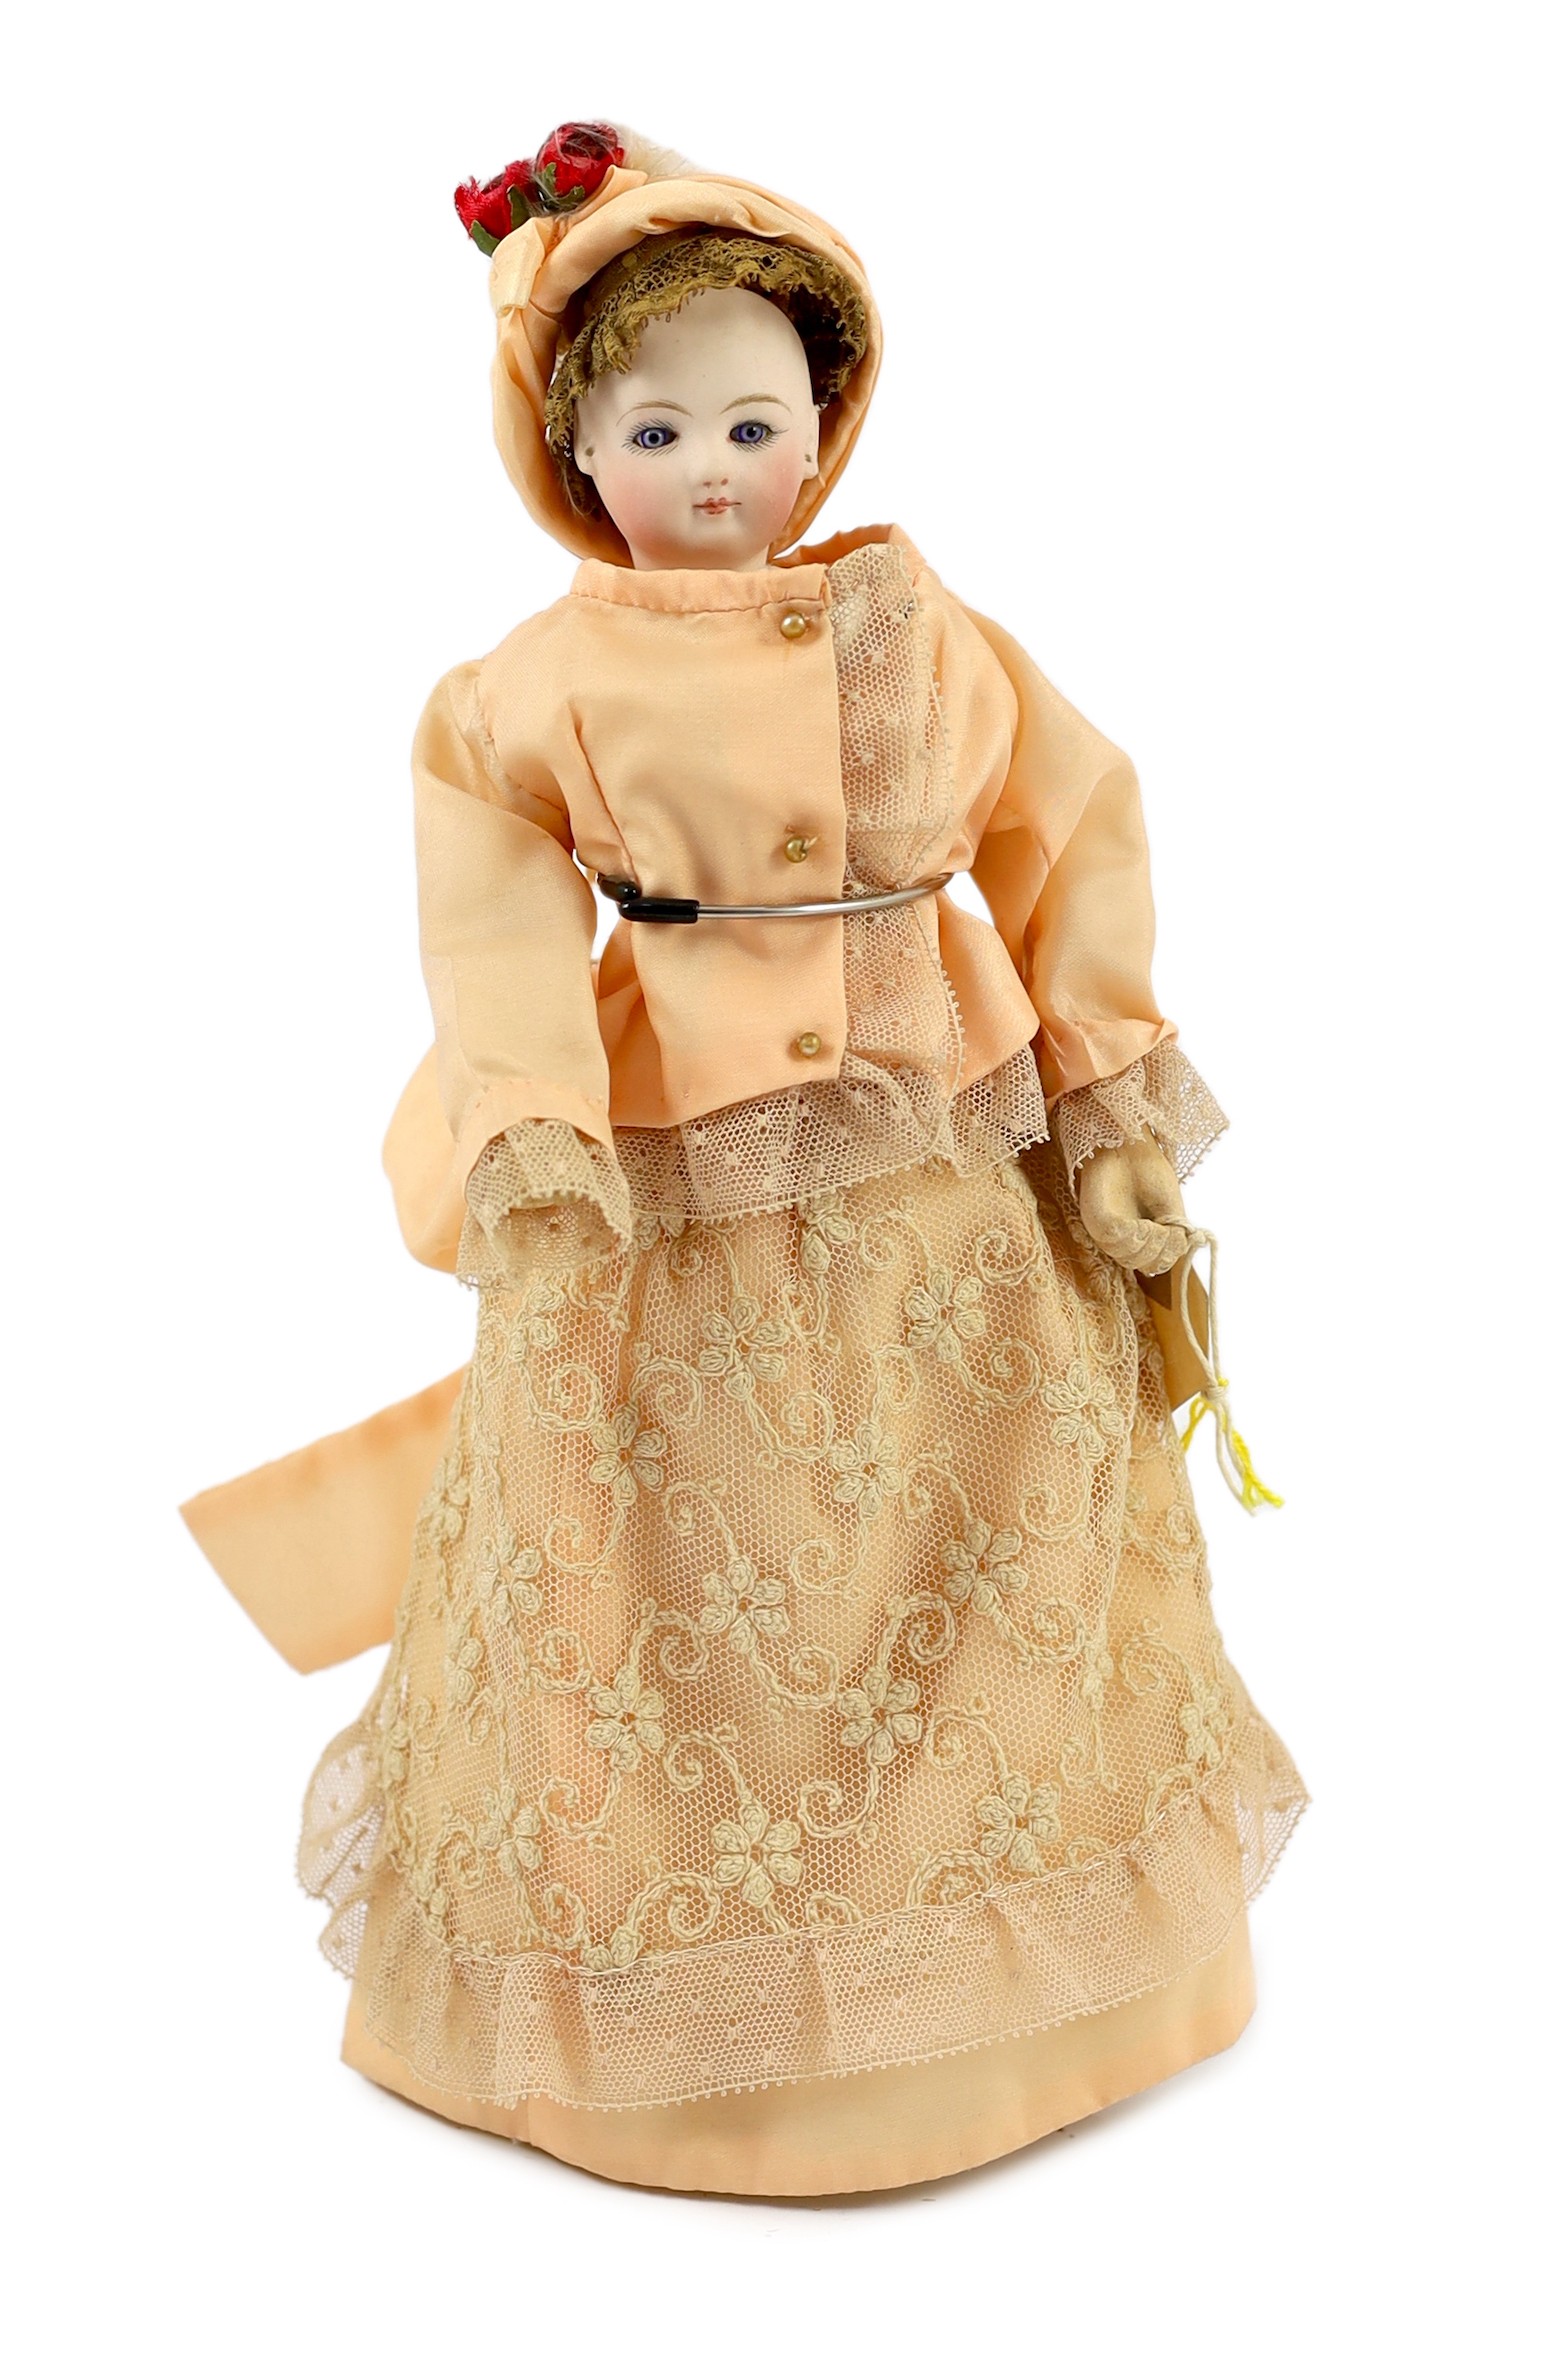 A Madame Barrois swivel-headed bisque doll, French, circa 1880, 11in.